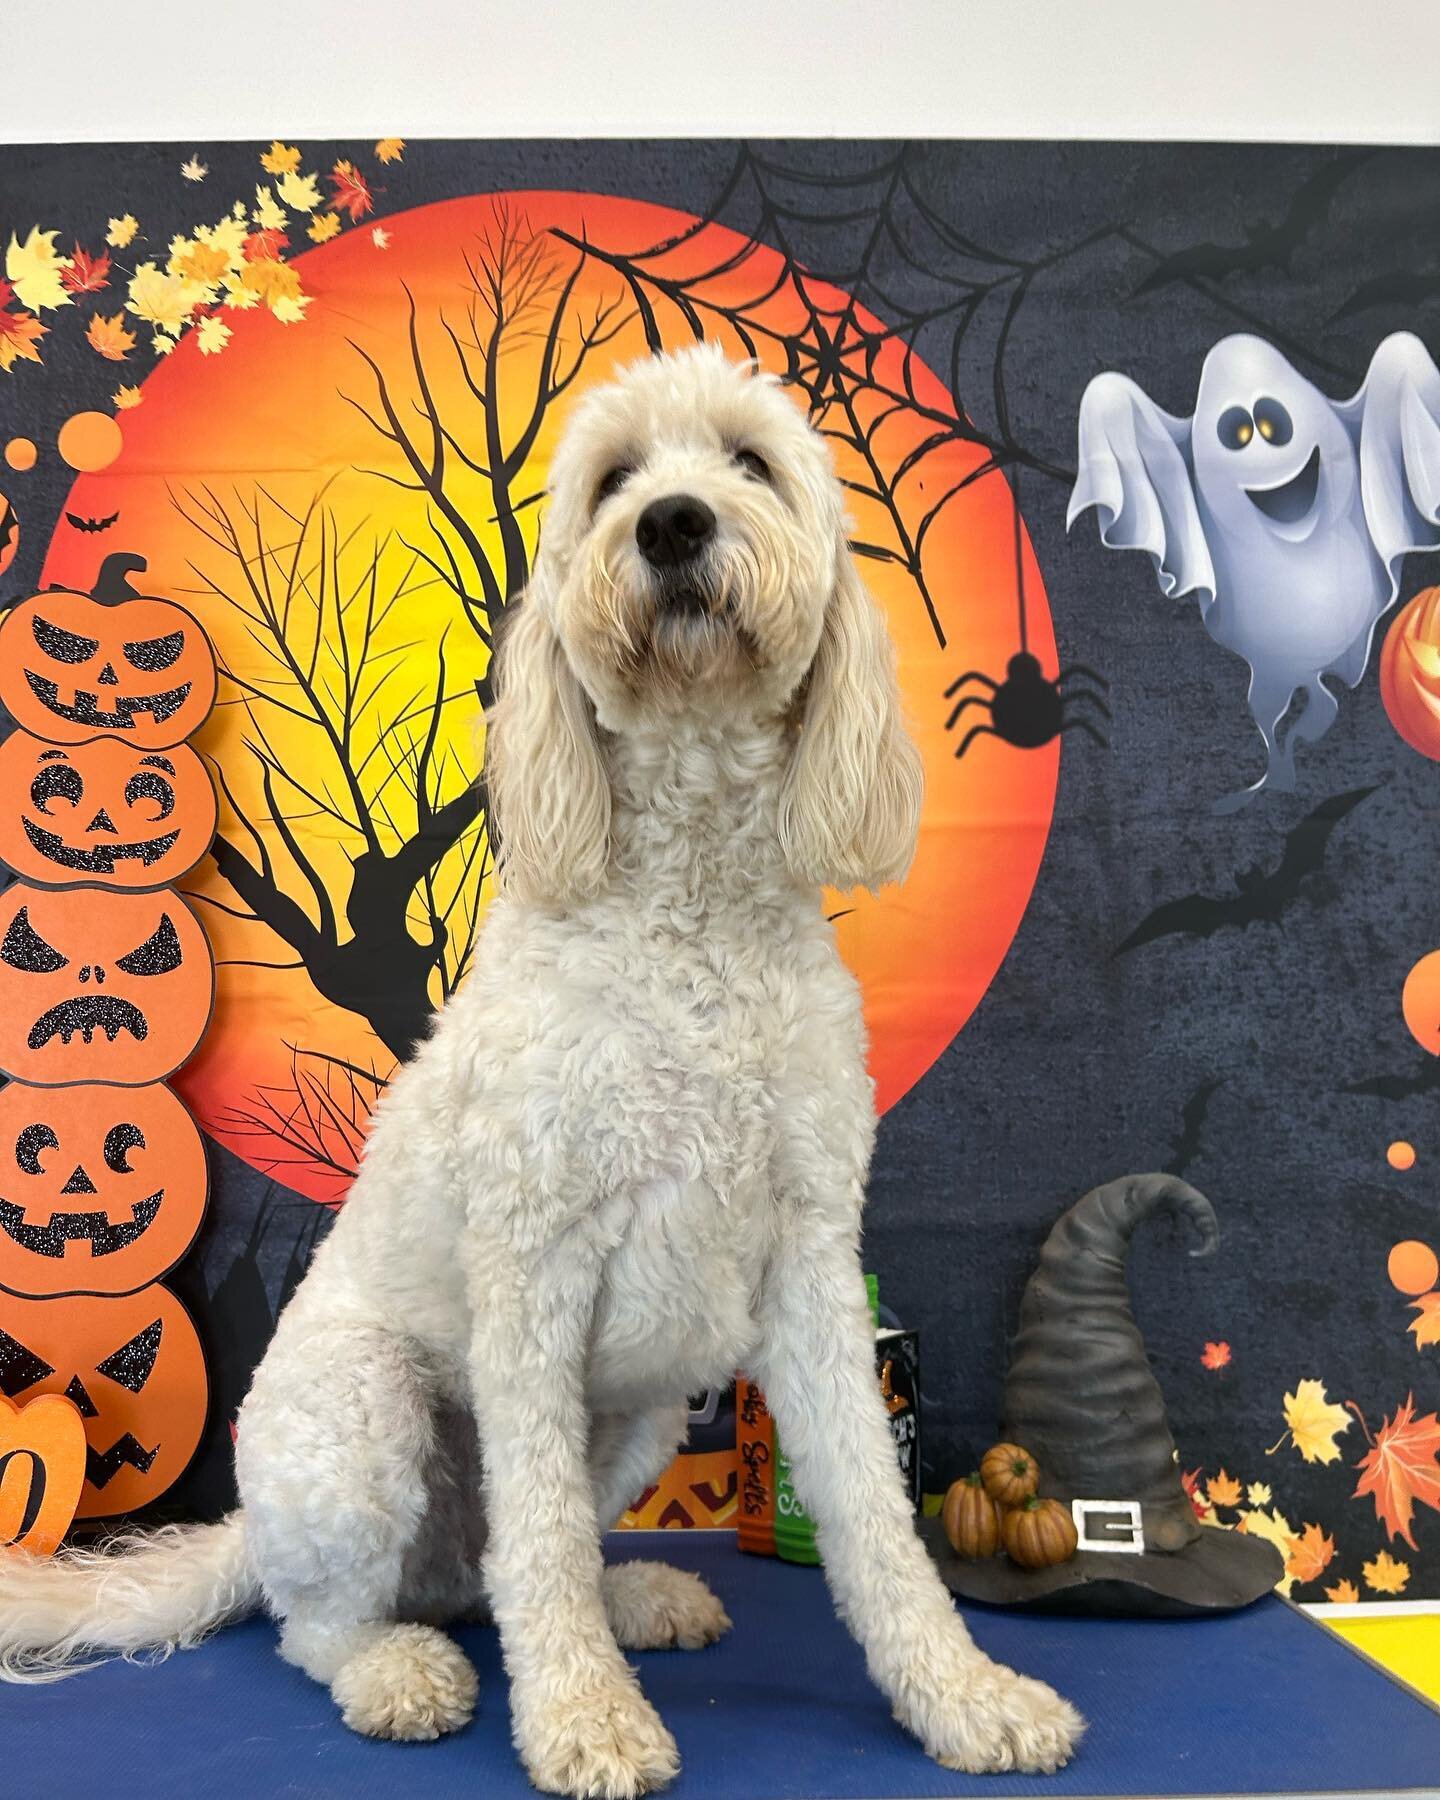 Today&rsquo;s Ghostly Grooms went a little like&hellip;&hellip;&hellip;

🐾 Click the spa services tab on our website for a Spooky Spaw Day! Www.thepackinc.com

#TheDogStay #ThePackInc #BrightenYourDay #LovePaws #DoggyDaycare #WoofOfJuly #Pupsicles #